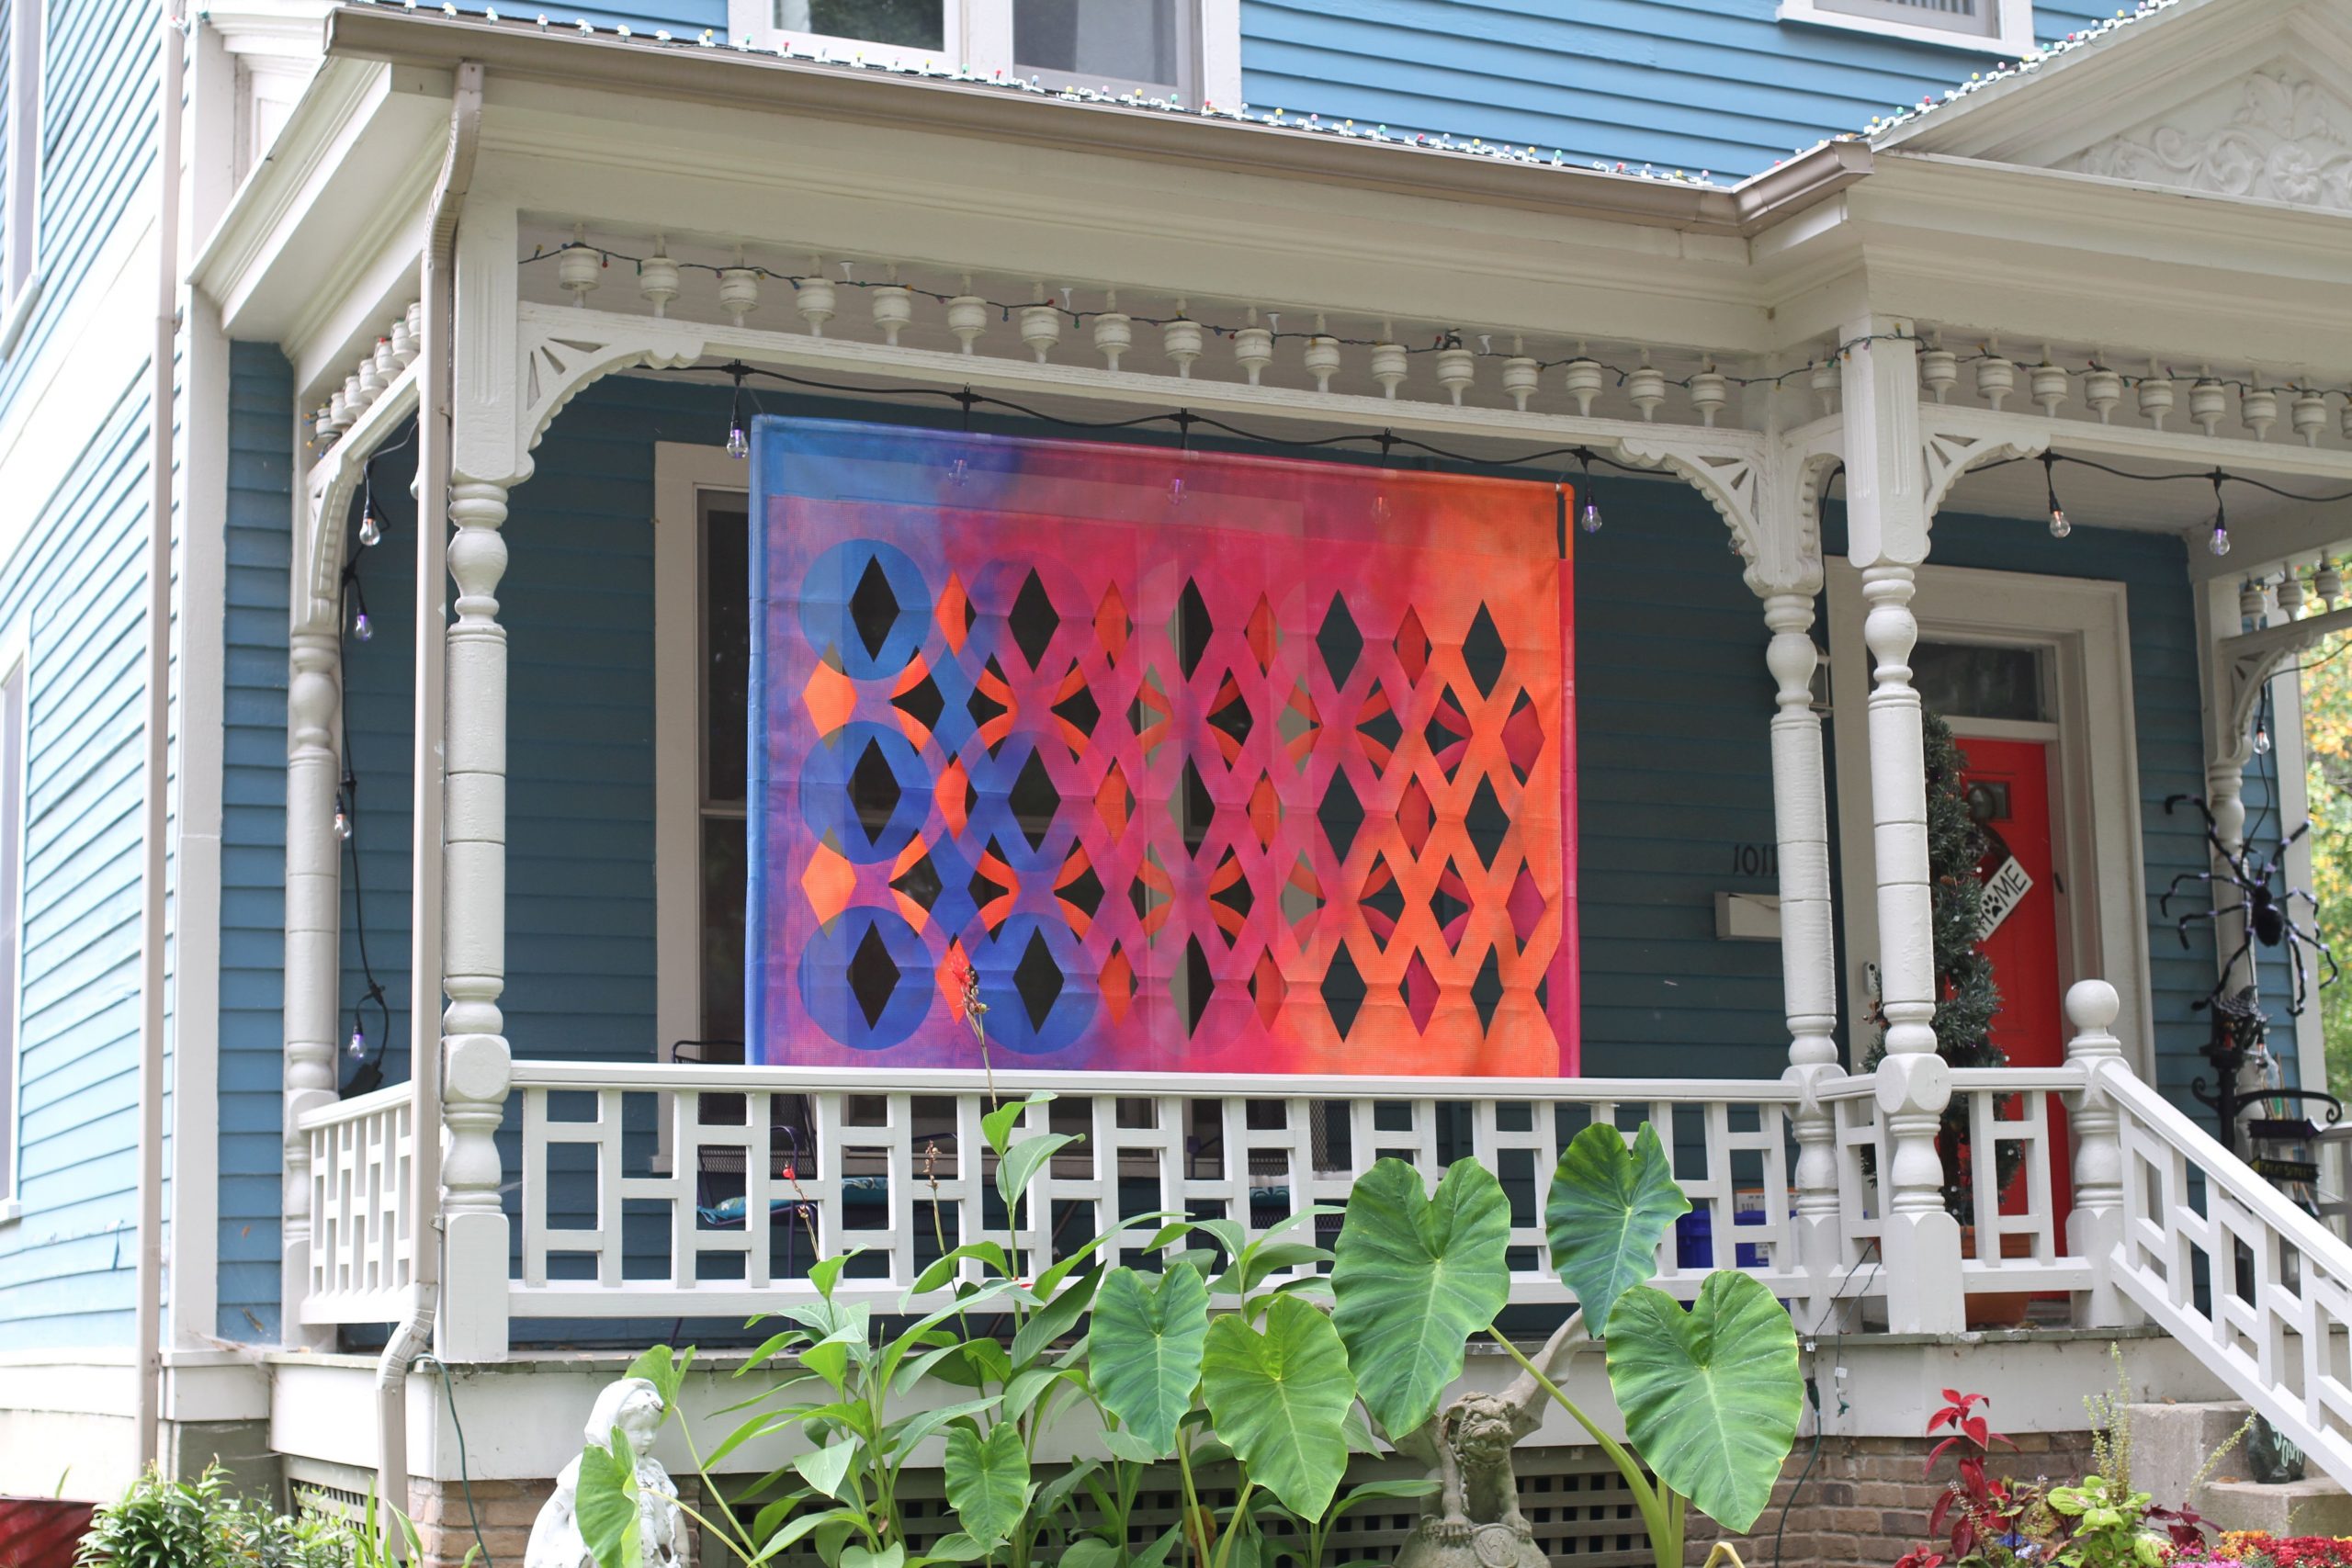 Featured image: Gina Hunt, XOXO at 1011 N. 6th Street, Springfield, IL. A colorful, geometric piece hangs in porch. The house is light blue with white trim. Plants grow in front of the porch. Photo by Jeff Robinson.